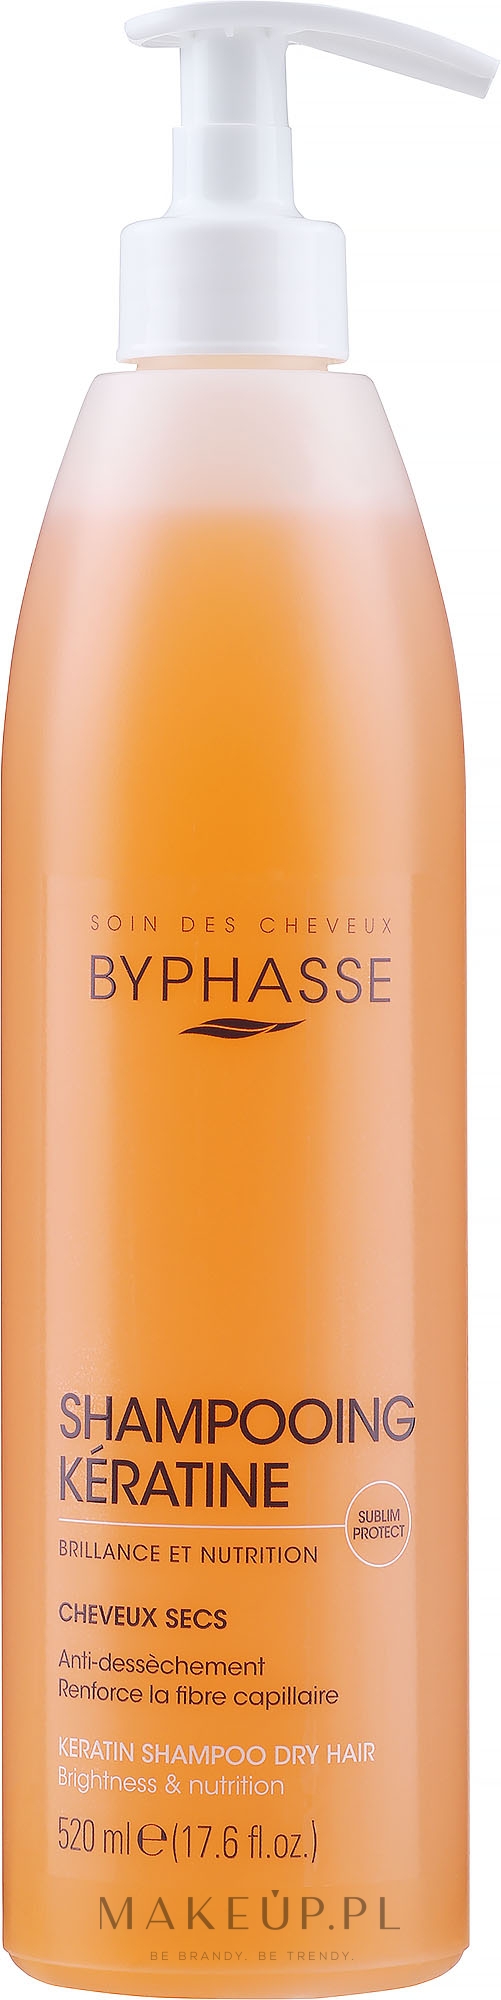 byphasse szampon 520 ml